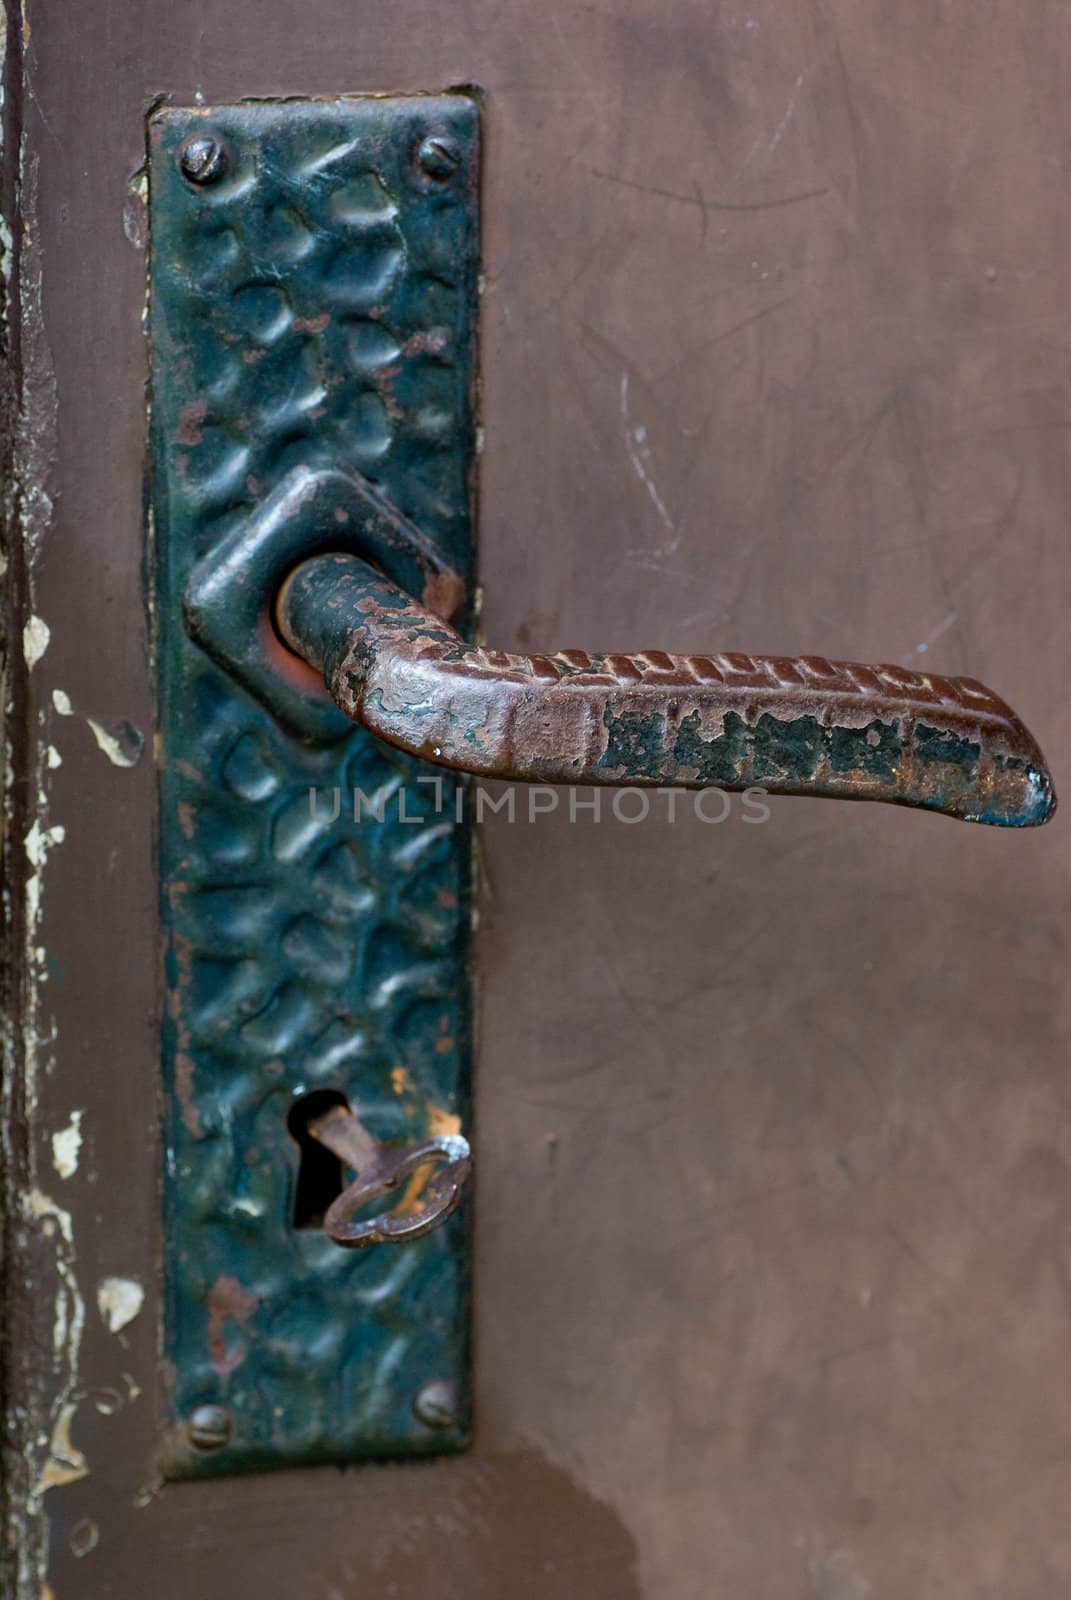 And old iron door handle with a key in the lock